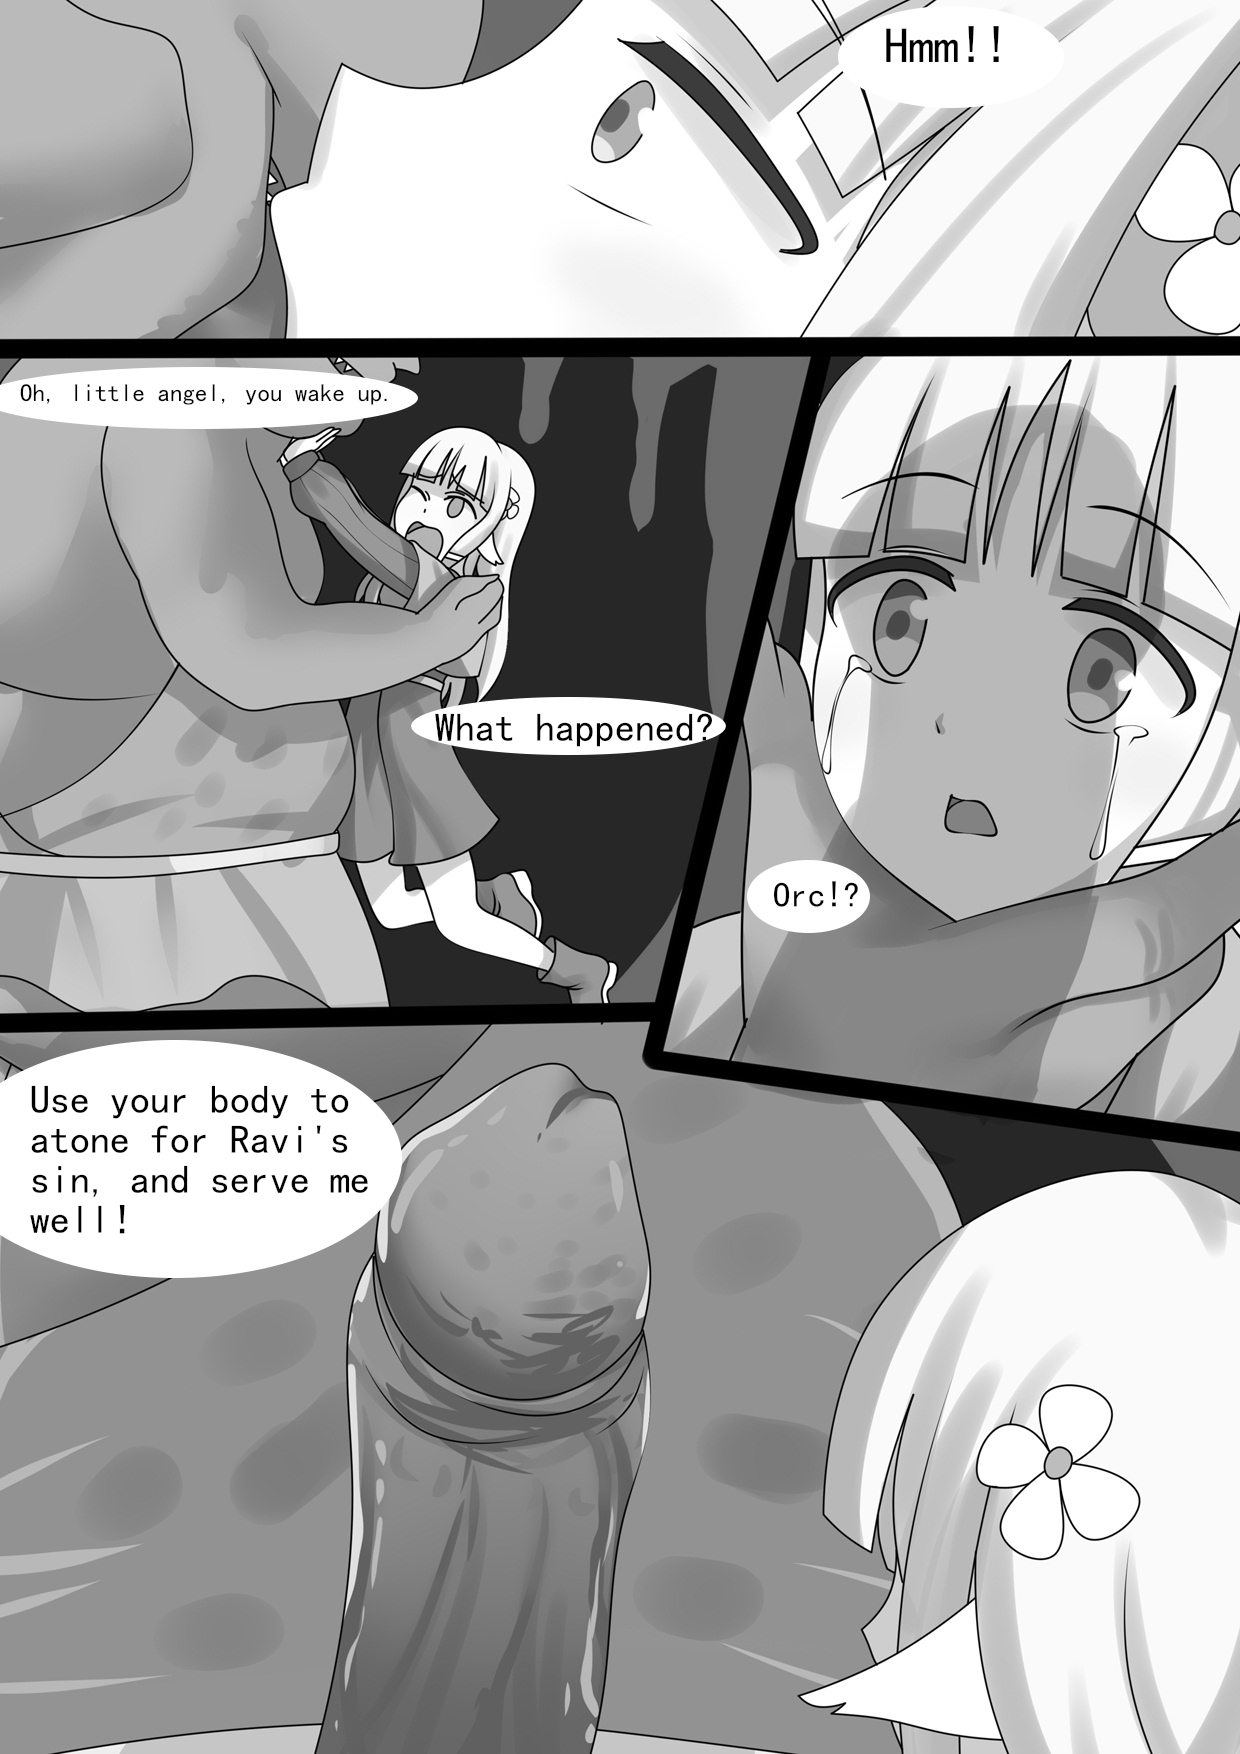 [WhitePH] Counterattack of Orcs 1 [English] page 8 full